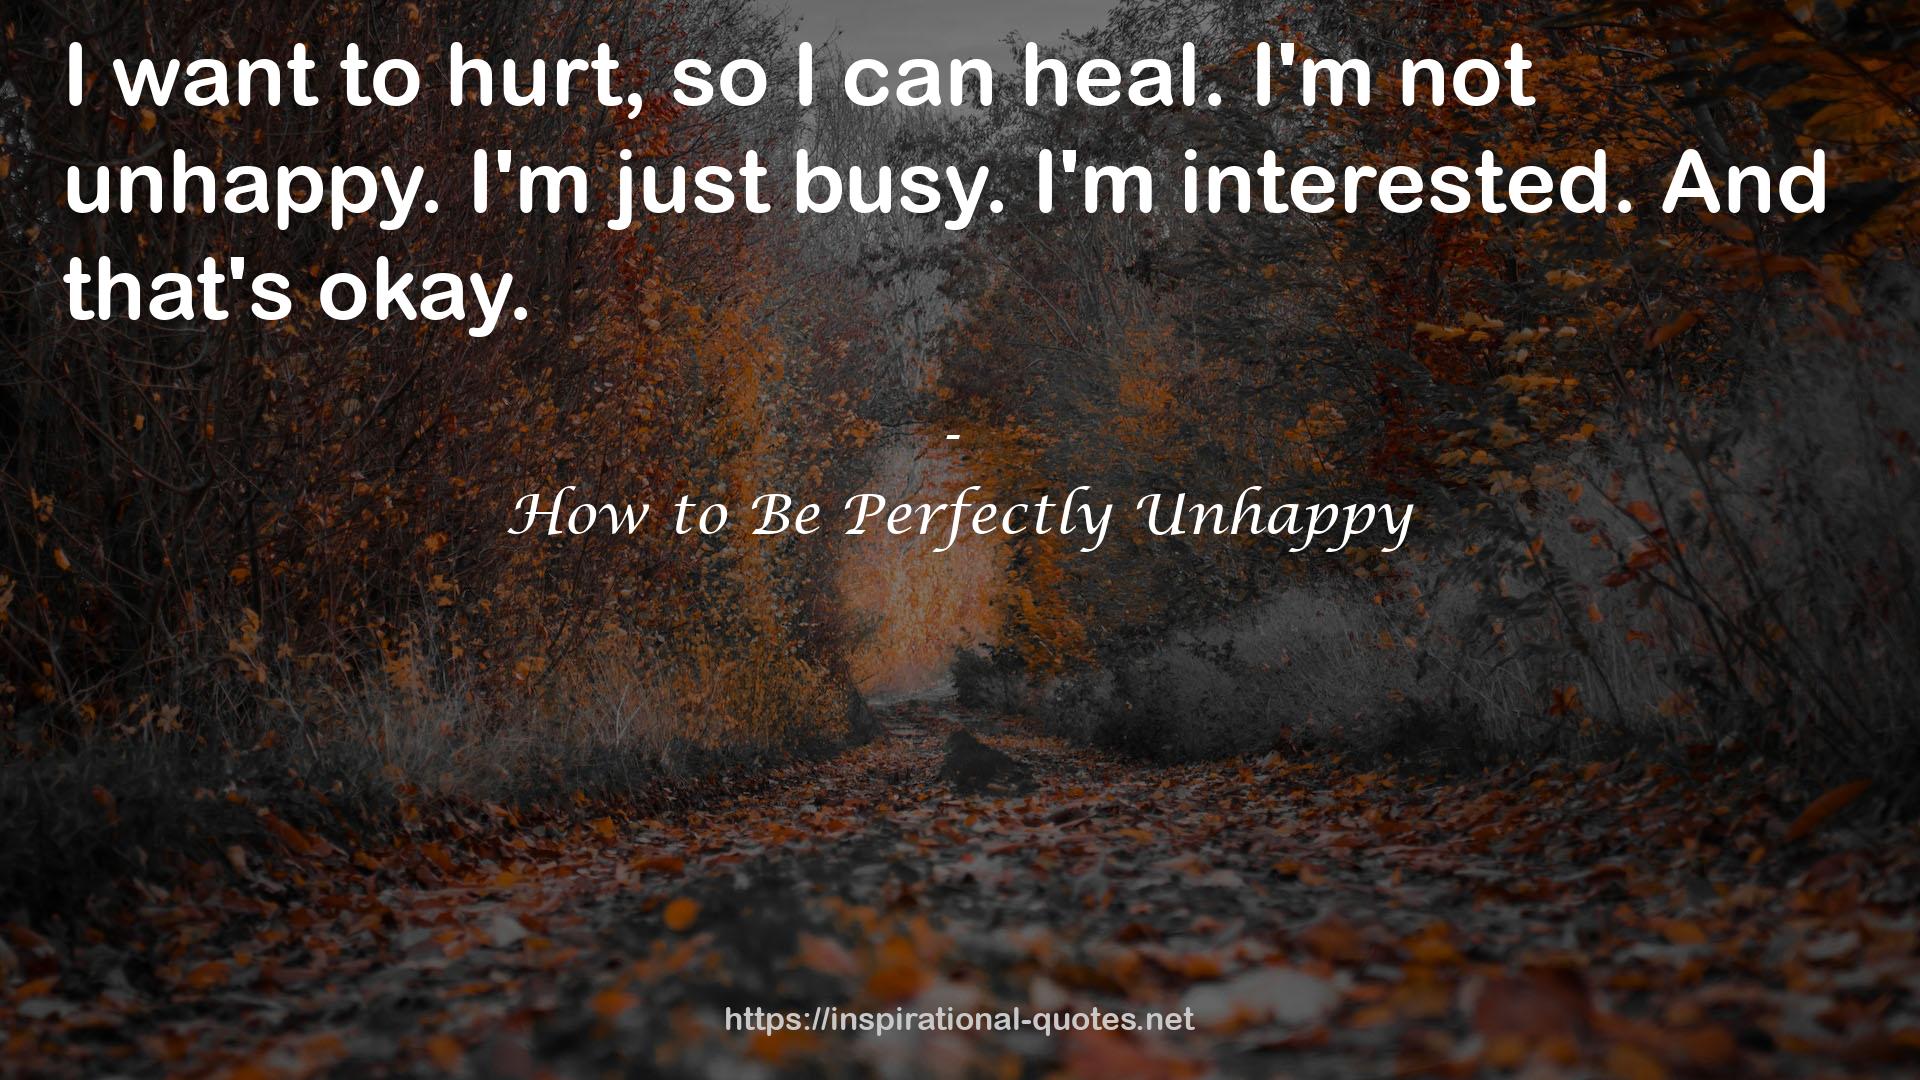 How to Be Perfectly Unhappy QUOTES